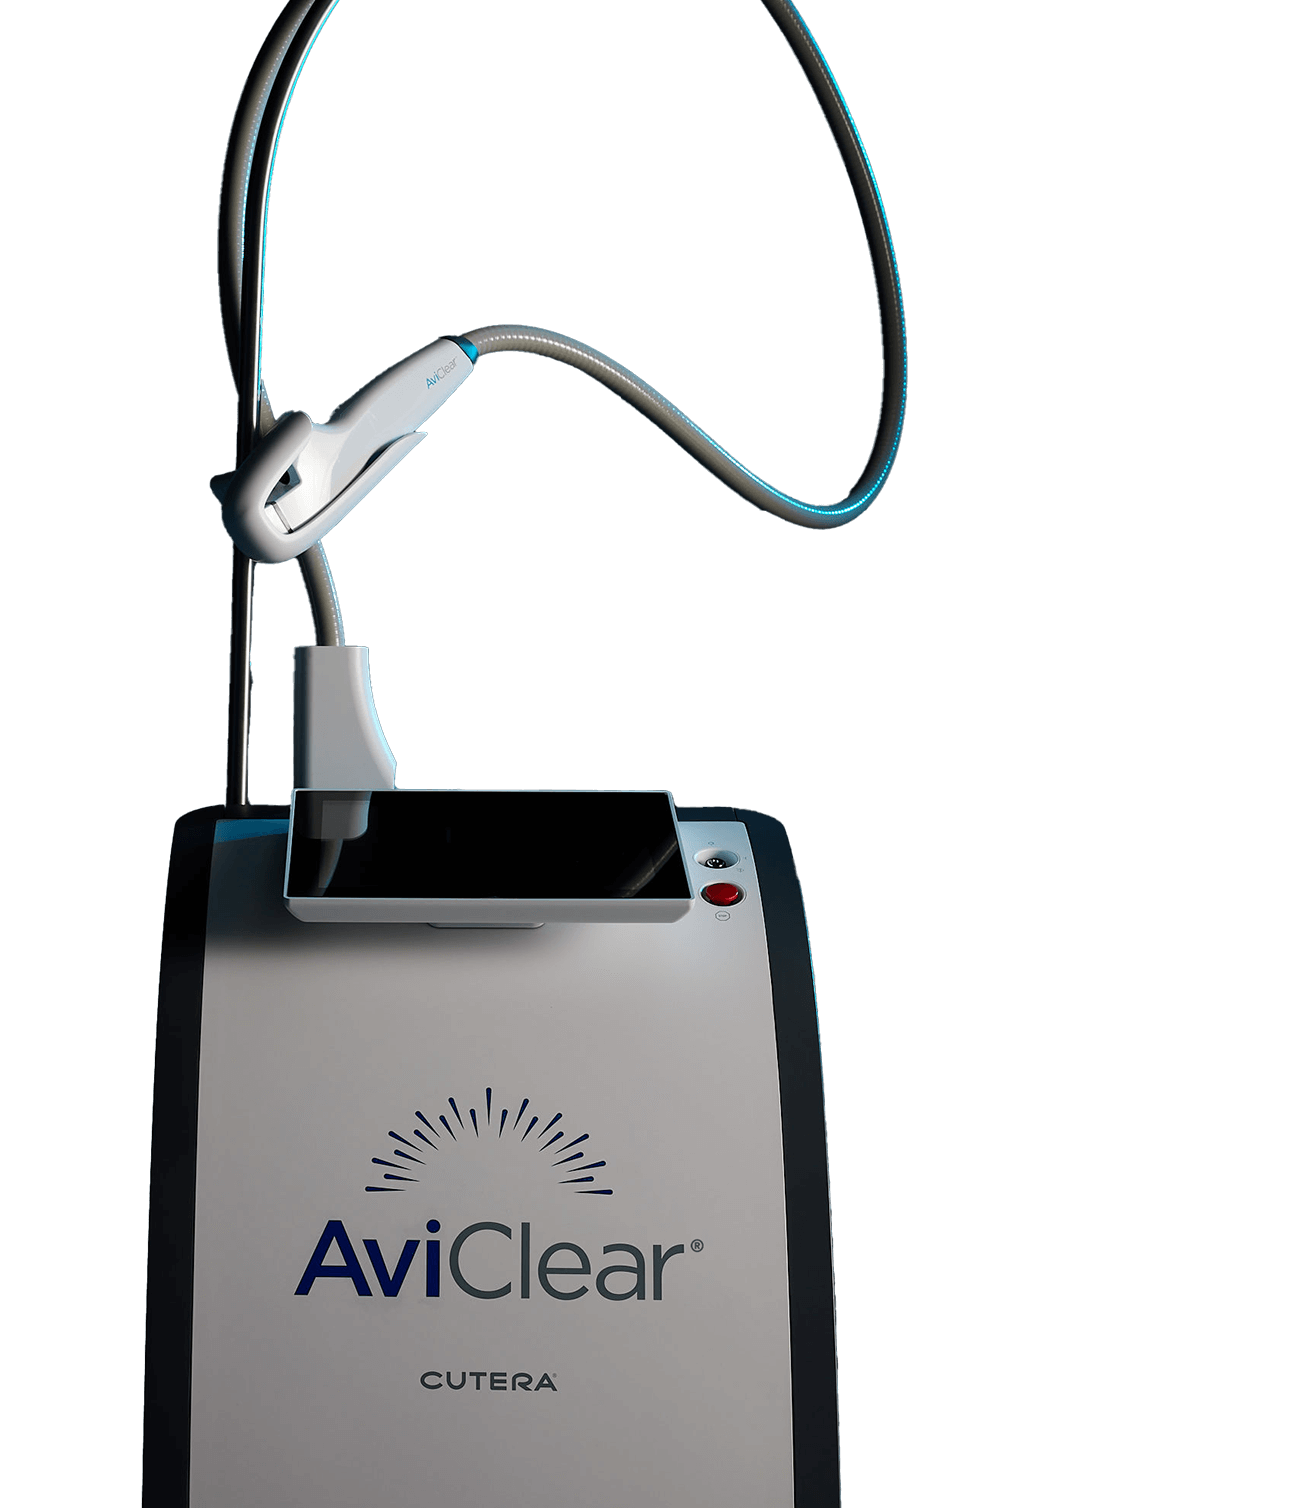 A AviClear device.